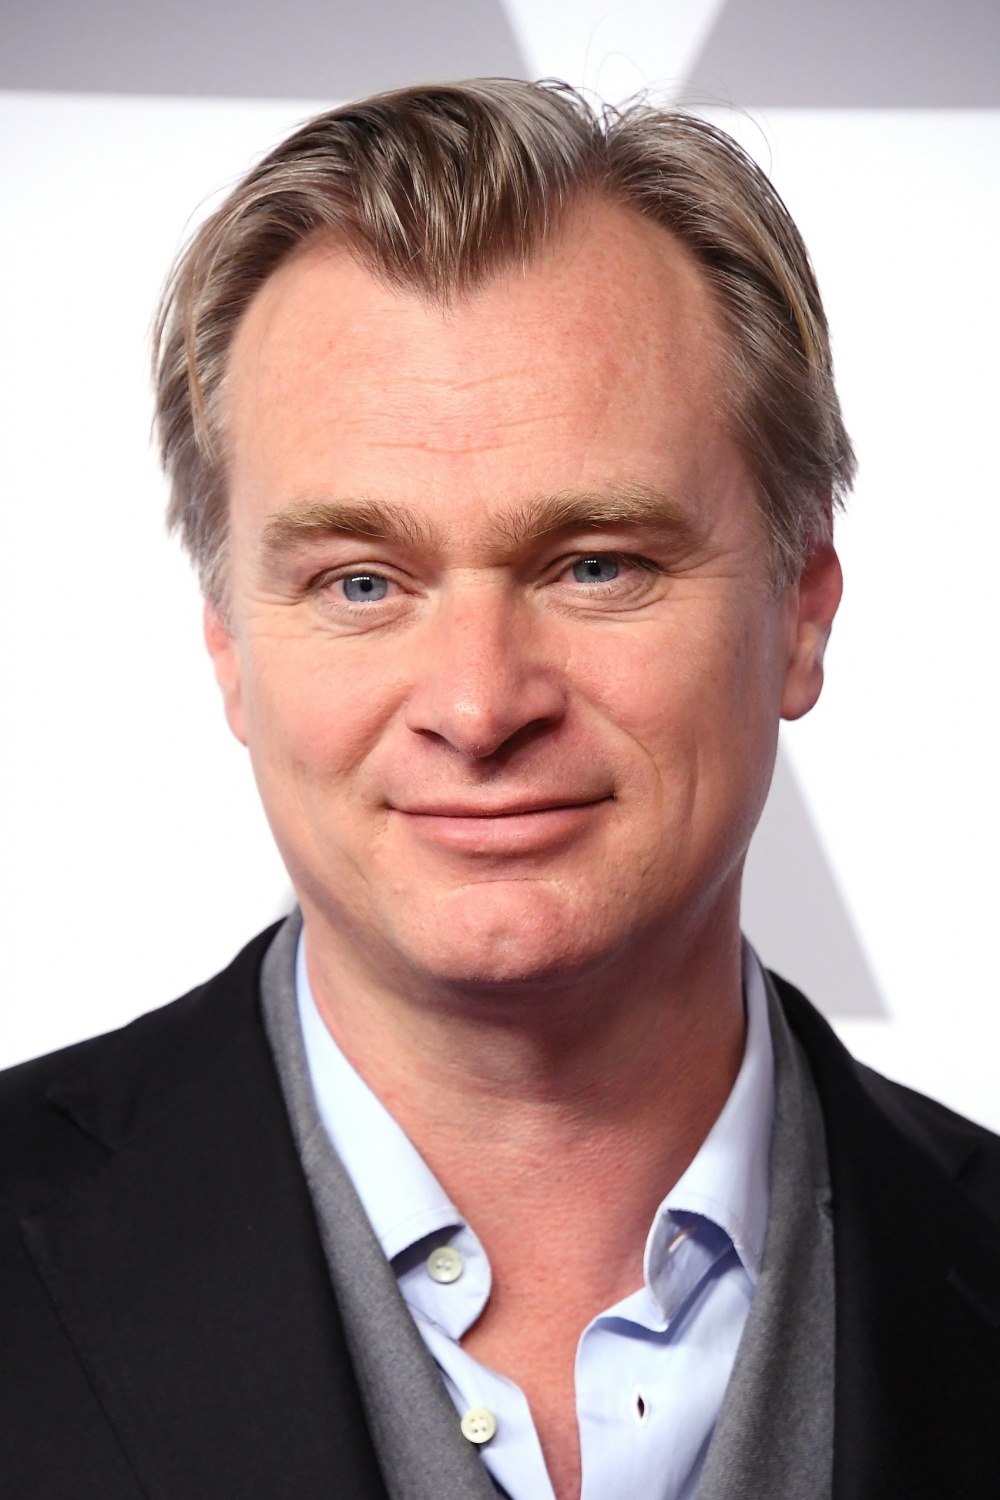 Filmmaker Christopher Nolan attends the 90th Annual Academy Awards Nominee Luncheon at The Beverly Hilton Hotel on February 5, 2018 in Beverly Hills, California.